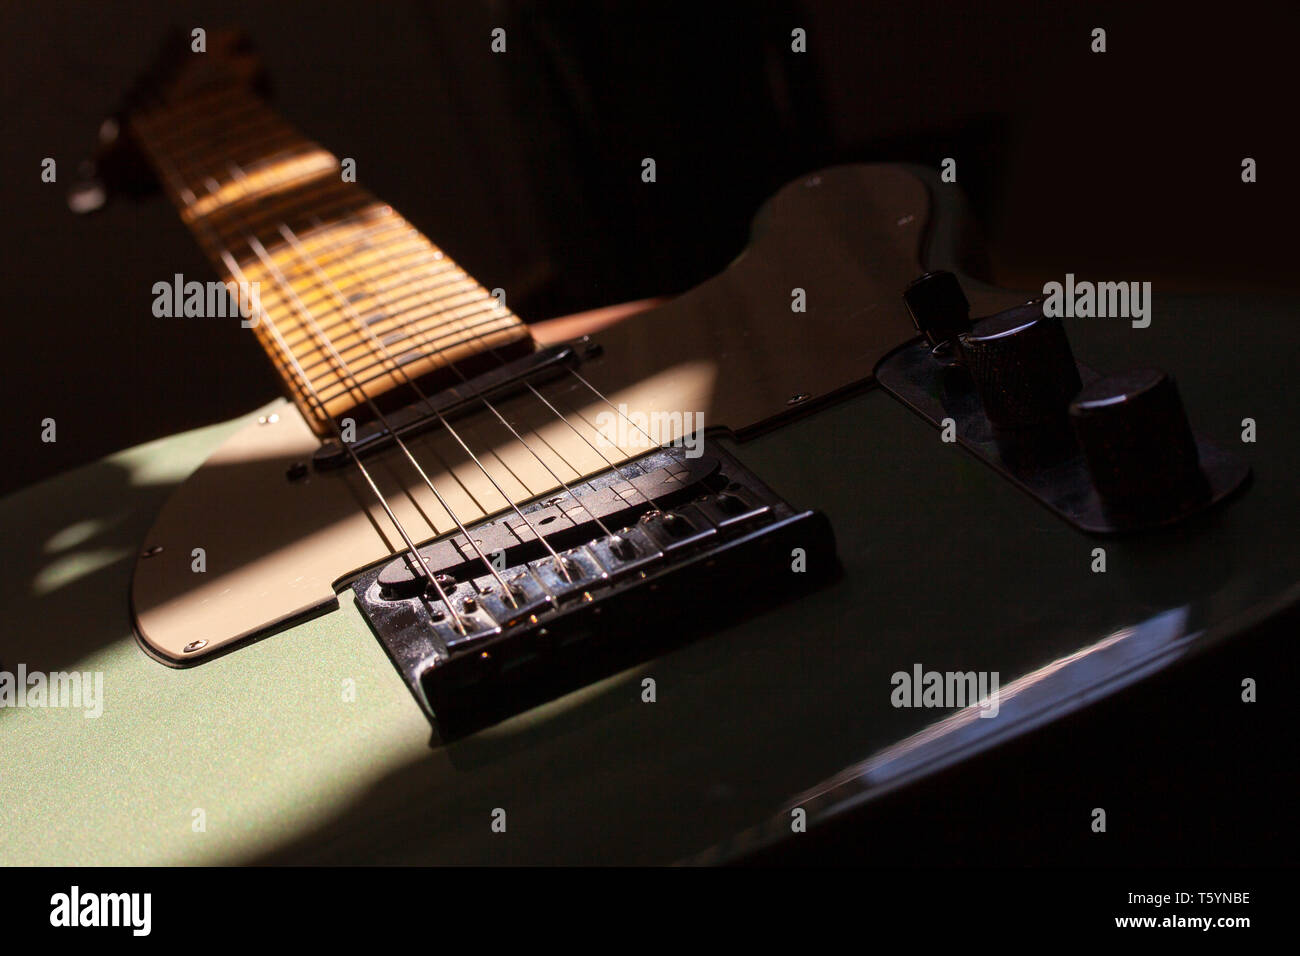 Electric guitar in creative lighting with shadows, closeup image Stock Photo